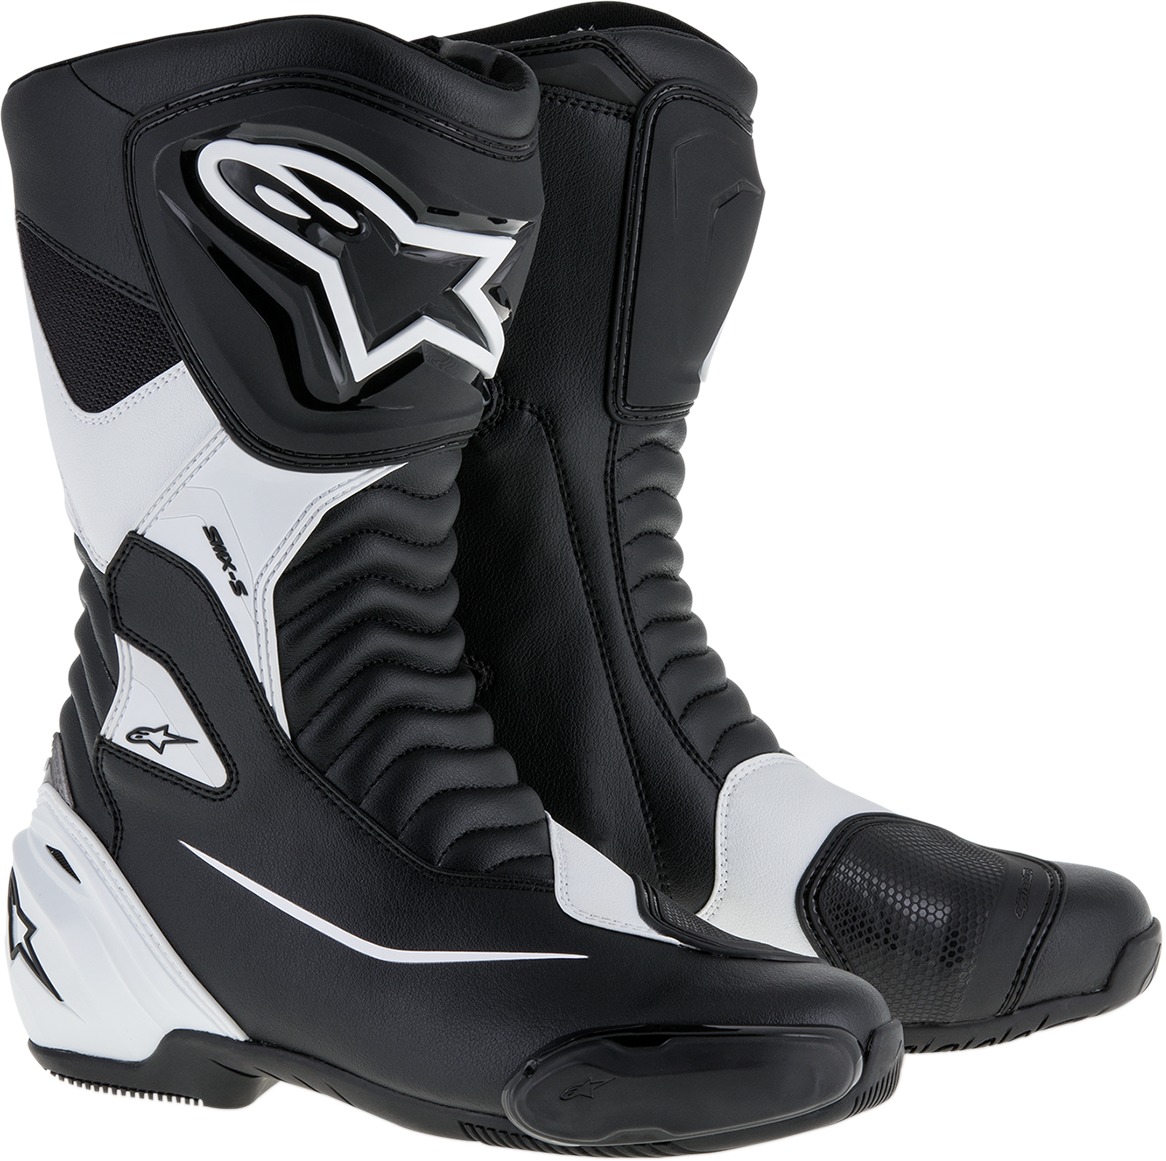 SMX-S Street Riding Boots Black/White US 4 - Click Image to Close